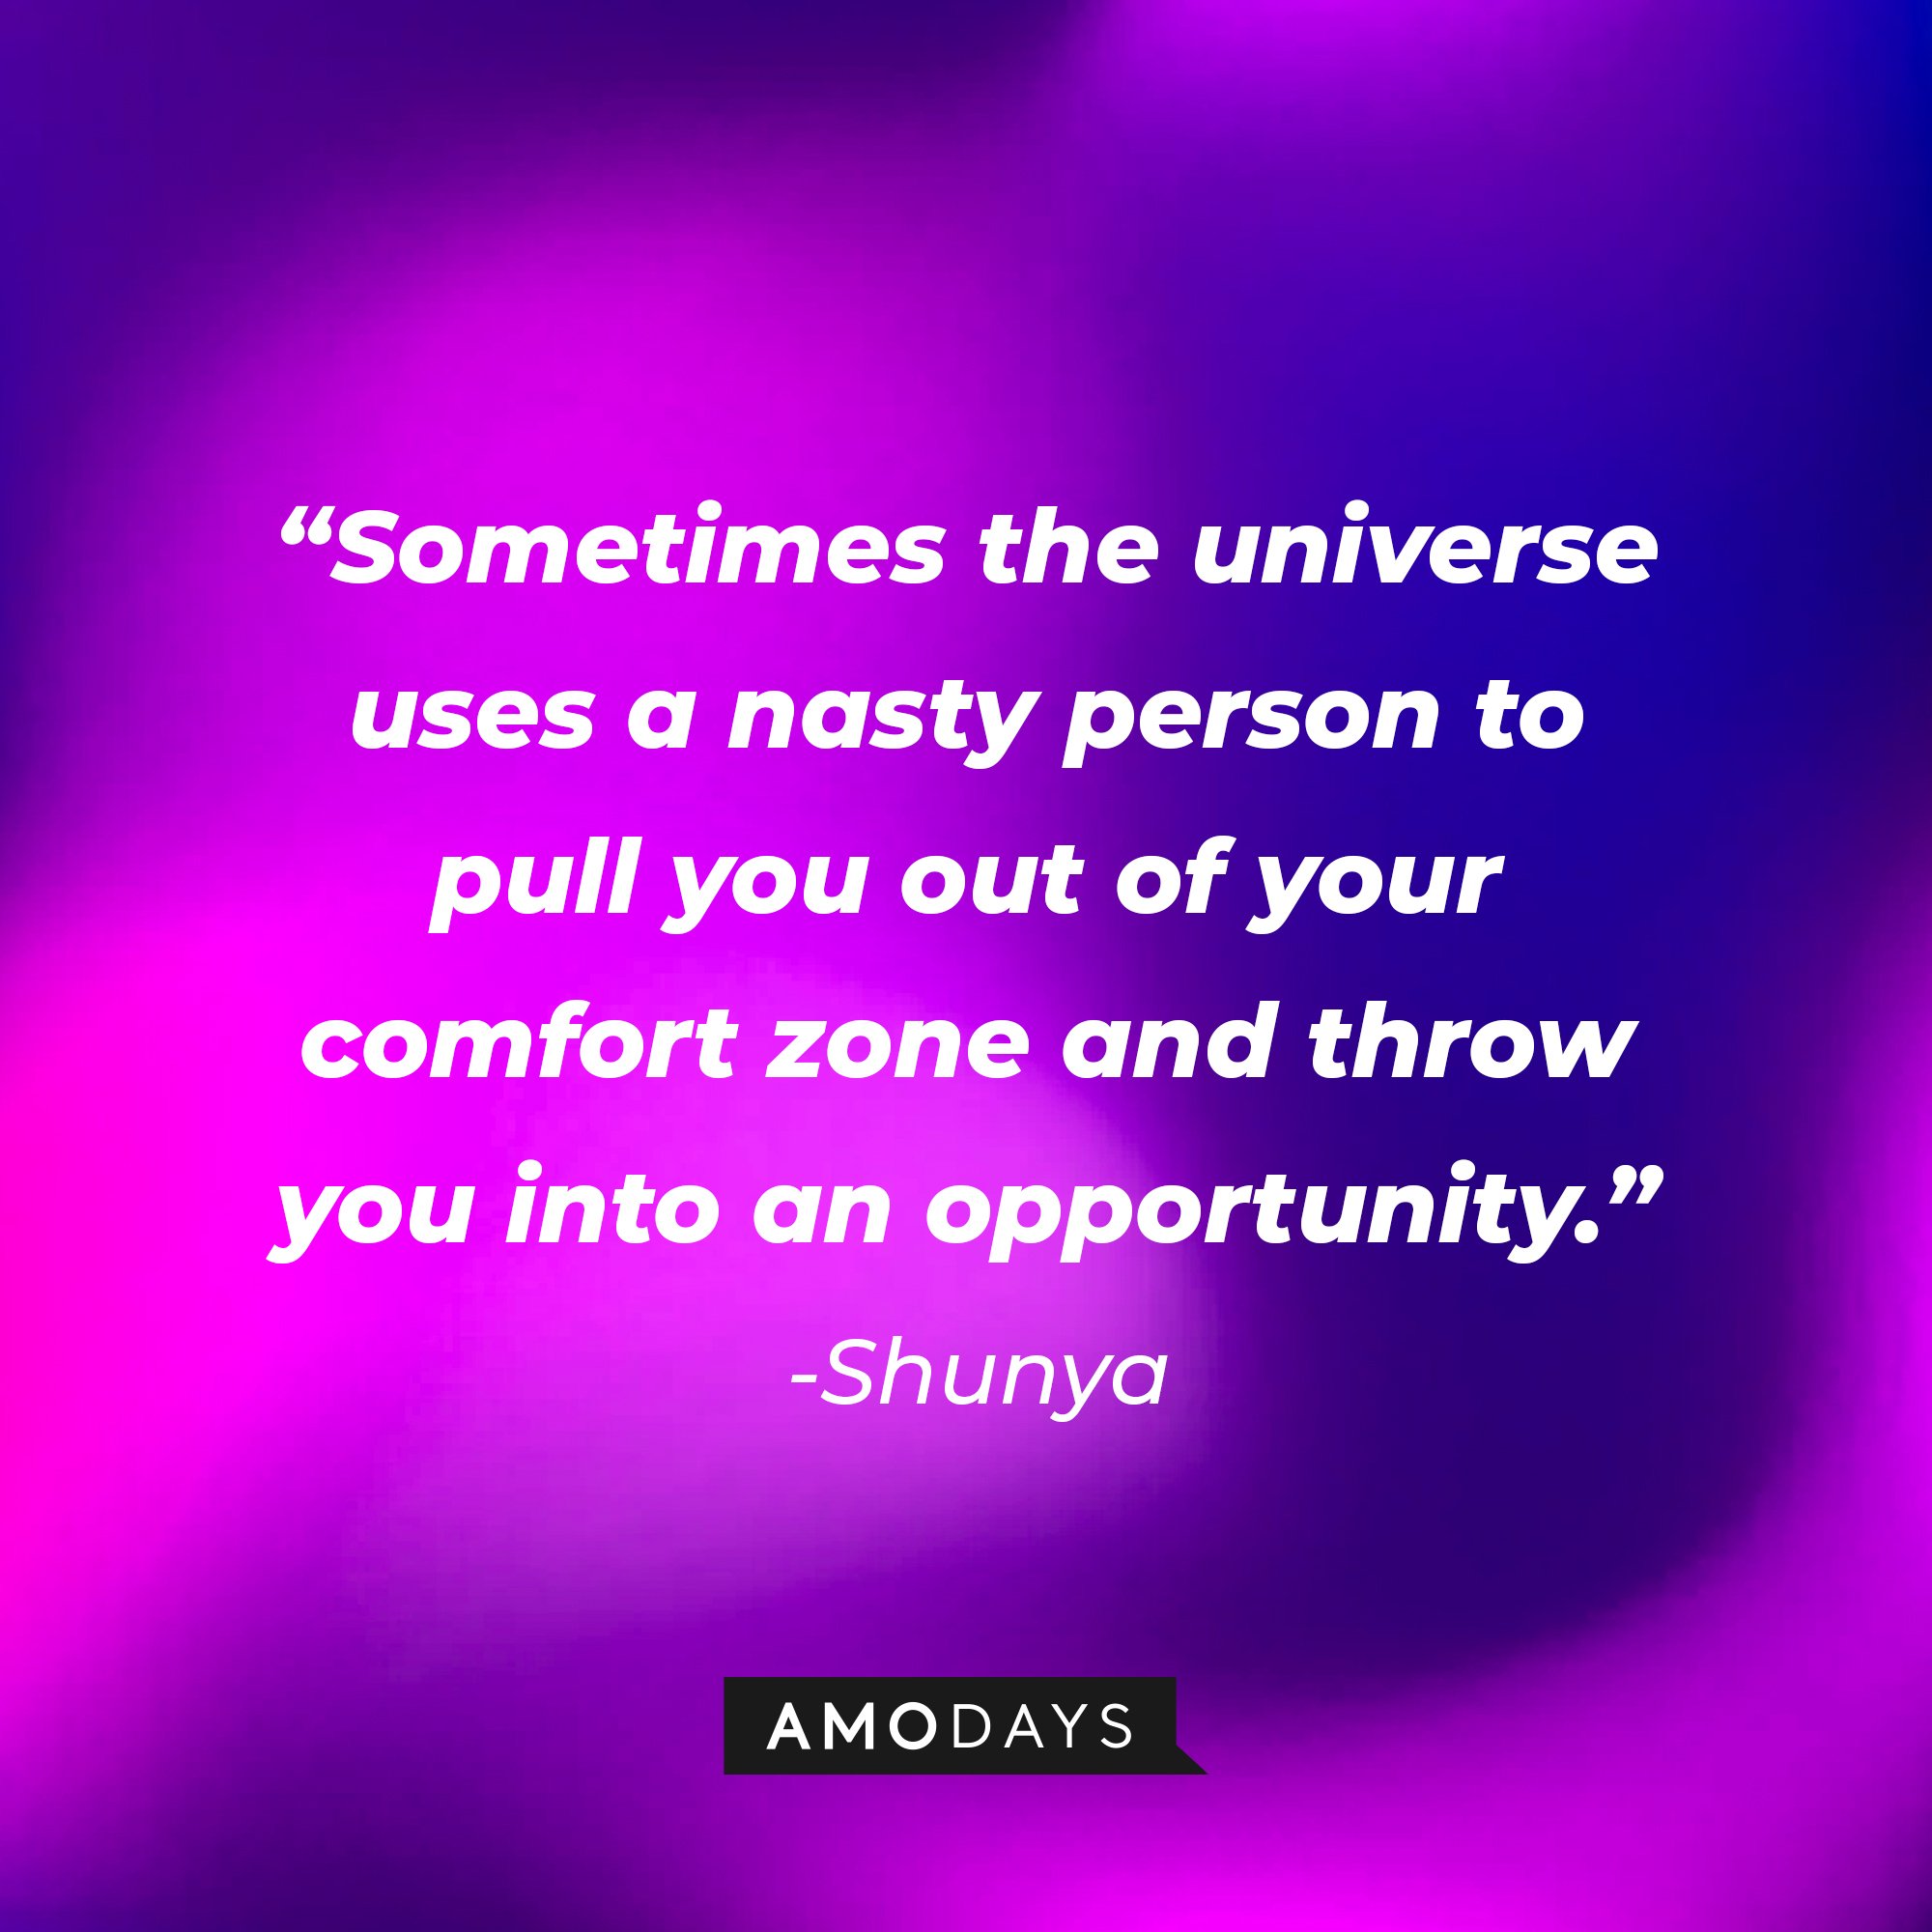 Shunya’s quote: "Sometimes the universe uses a nasty person to pull you out of your comfort zone and throw you into an opportunity." | Image: AmoDays 